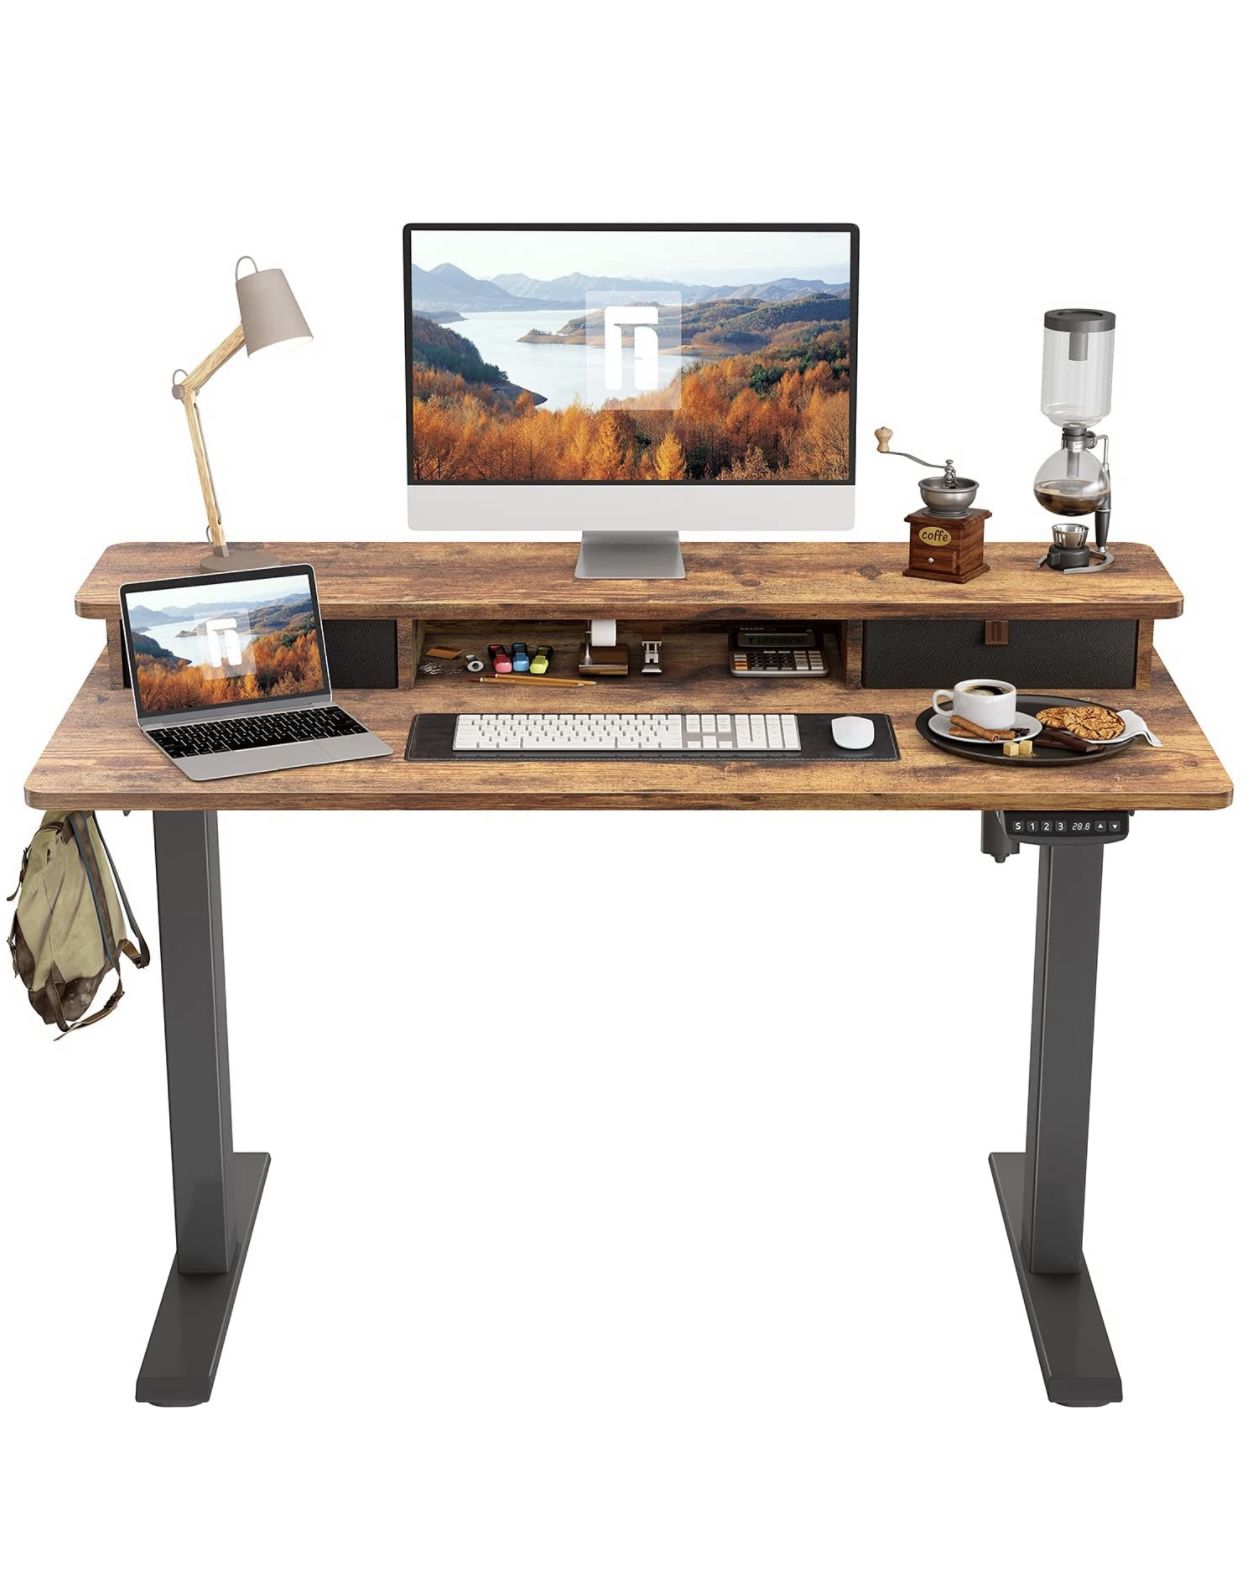 FEZIBO Height Adjustable Electric Standing Desk with Double Drawer, 48 x 24 Inch Stand Up Table